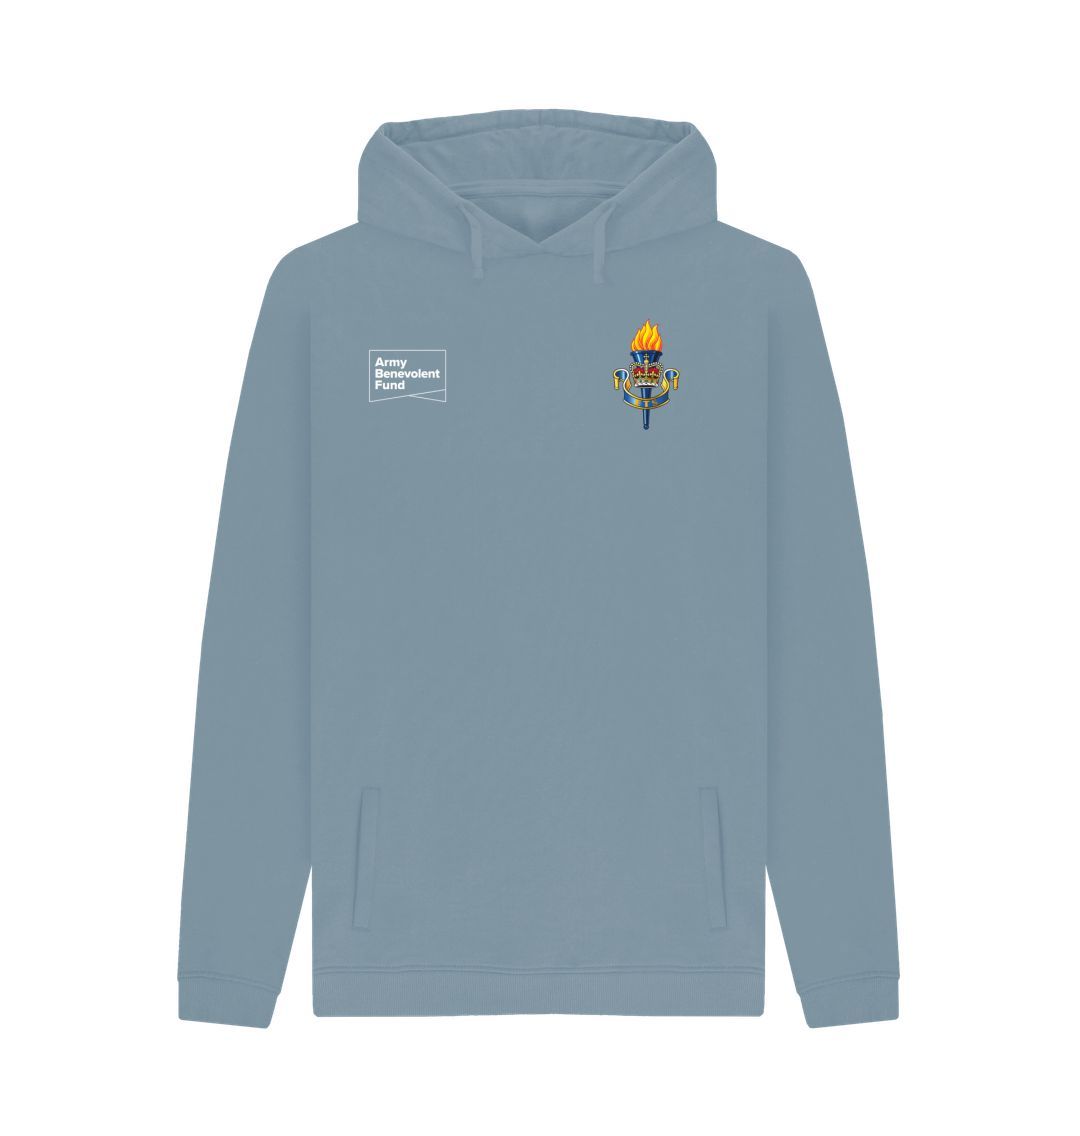 Adjutant General's Corps Educational & Training Services Unisex Hoodie - Army Benevolent Fund